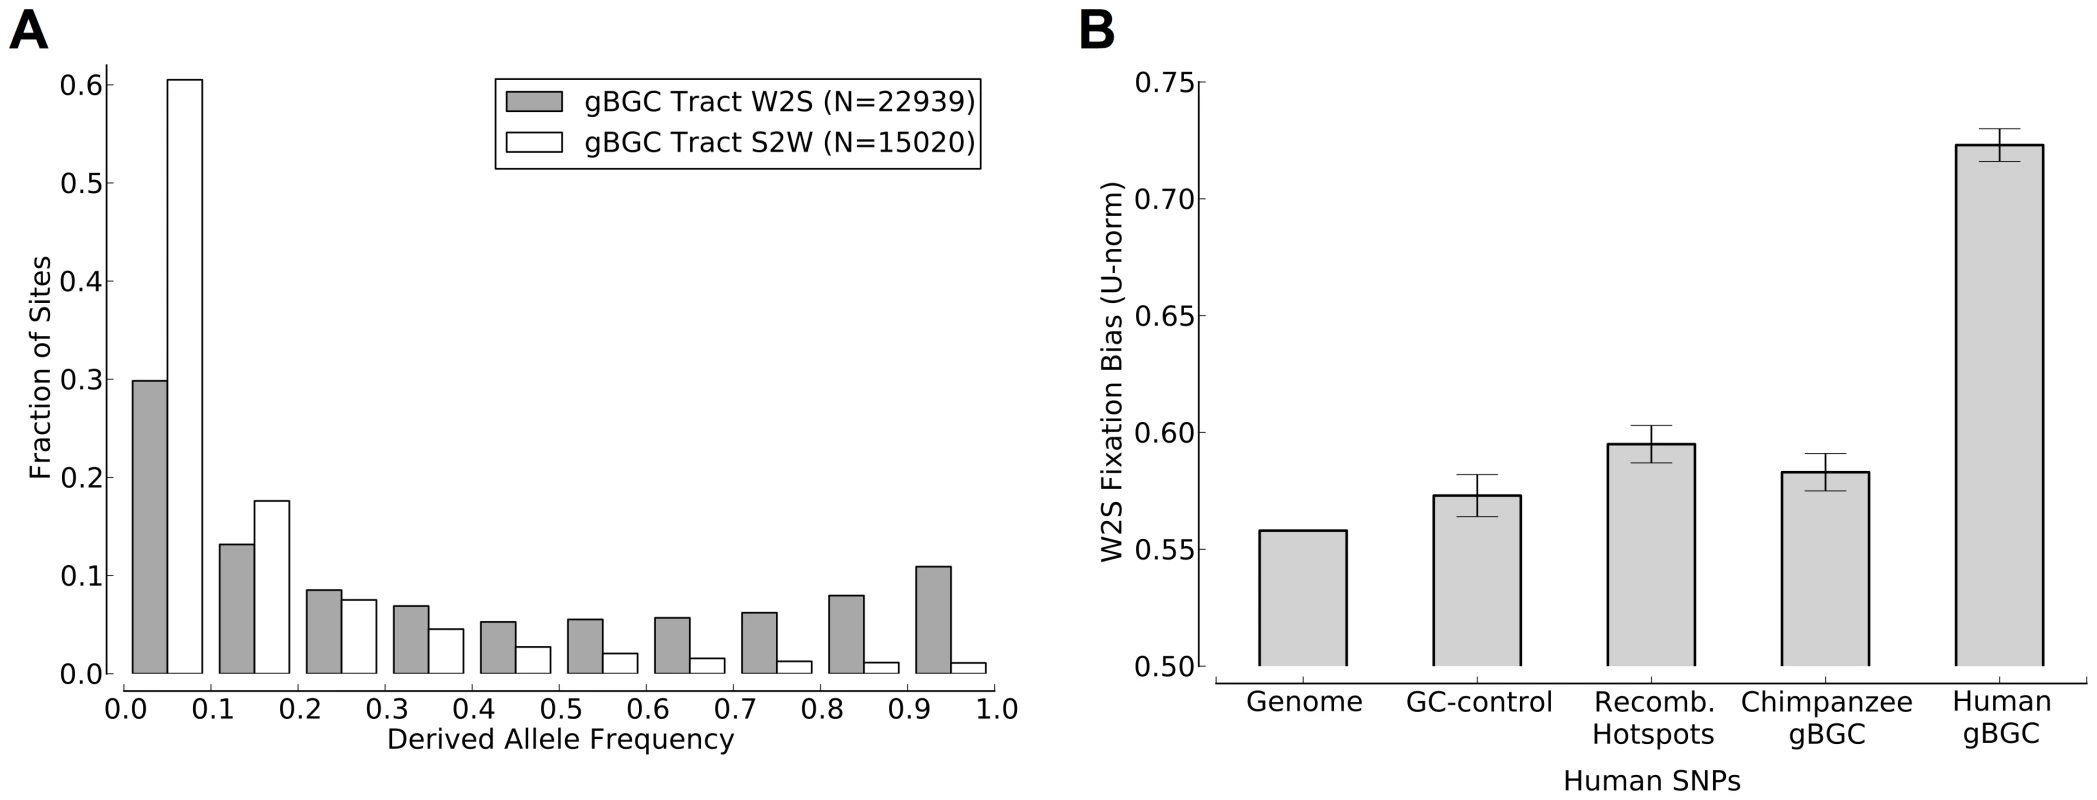 Human polymorphism data indicates an ongoing preference for the fixation of G and C alleles in the predicted gBGC tracts.